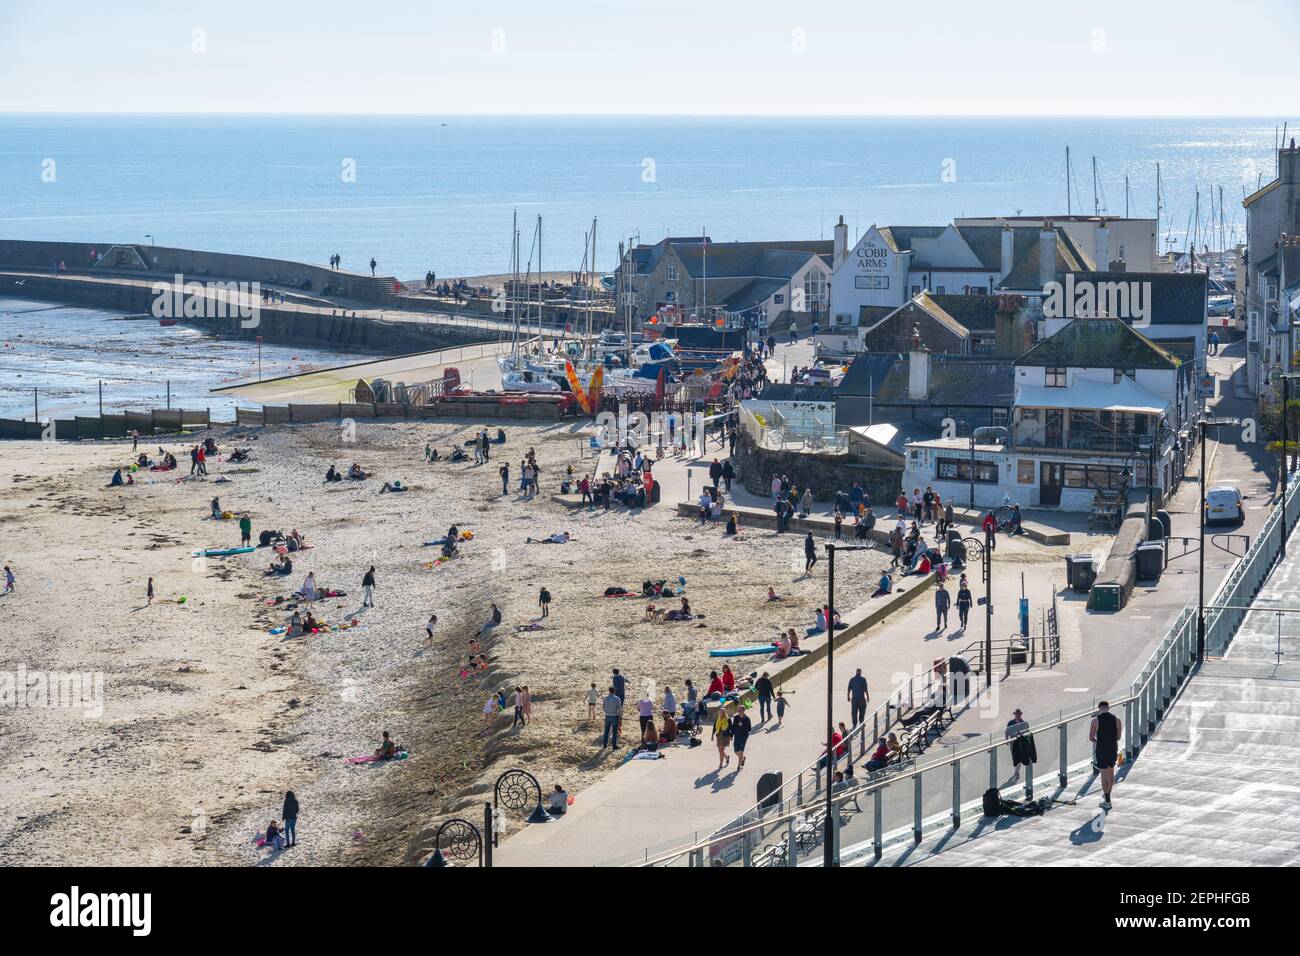 Lyme Regis, Dorset, UK. 27th Feb, 2021. UK Weather: Plenty of people were out and about enjoying unseasonably warm and sunny weather at the seaside resort of Lyme Regis this afternoon. Credit: Celia McMahon/Alamy Live News Stock Photo